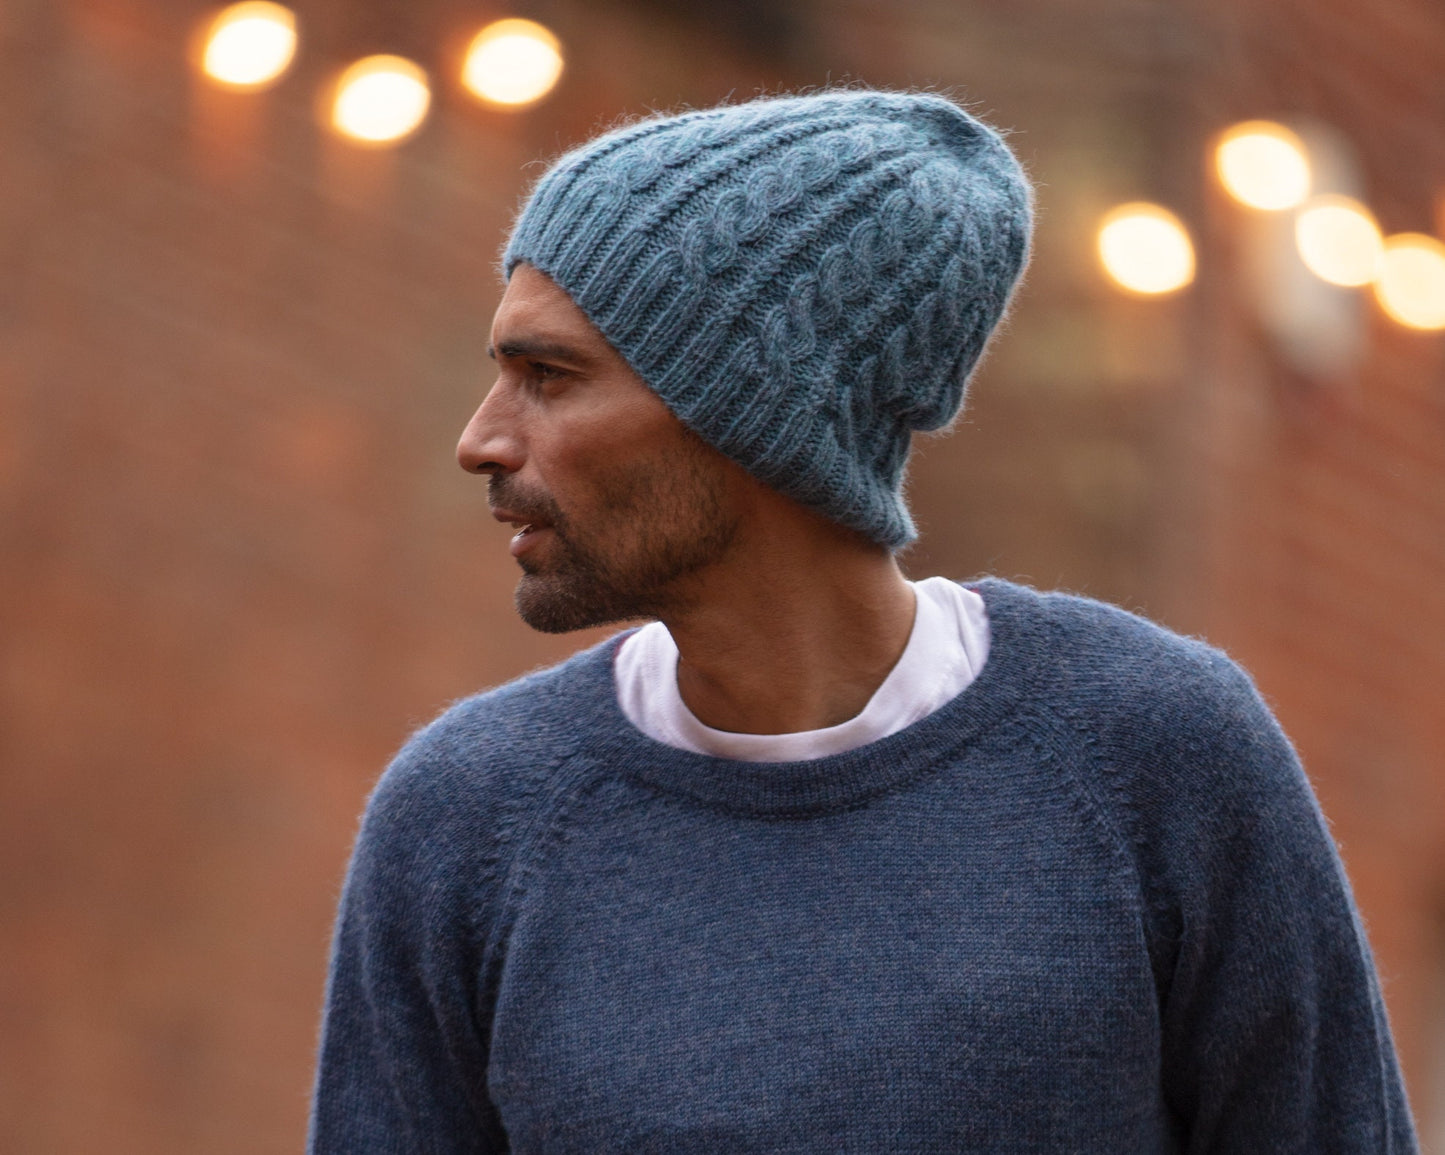 Men's beanie hat, cable knit, 100% alpaca wool, hand knitted toque, natural fibres, plastic free cap, warm winter slouchy hat, eco gift man